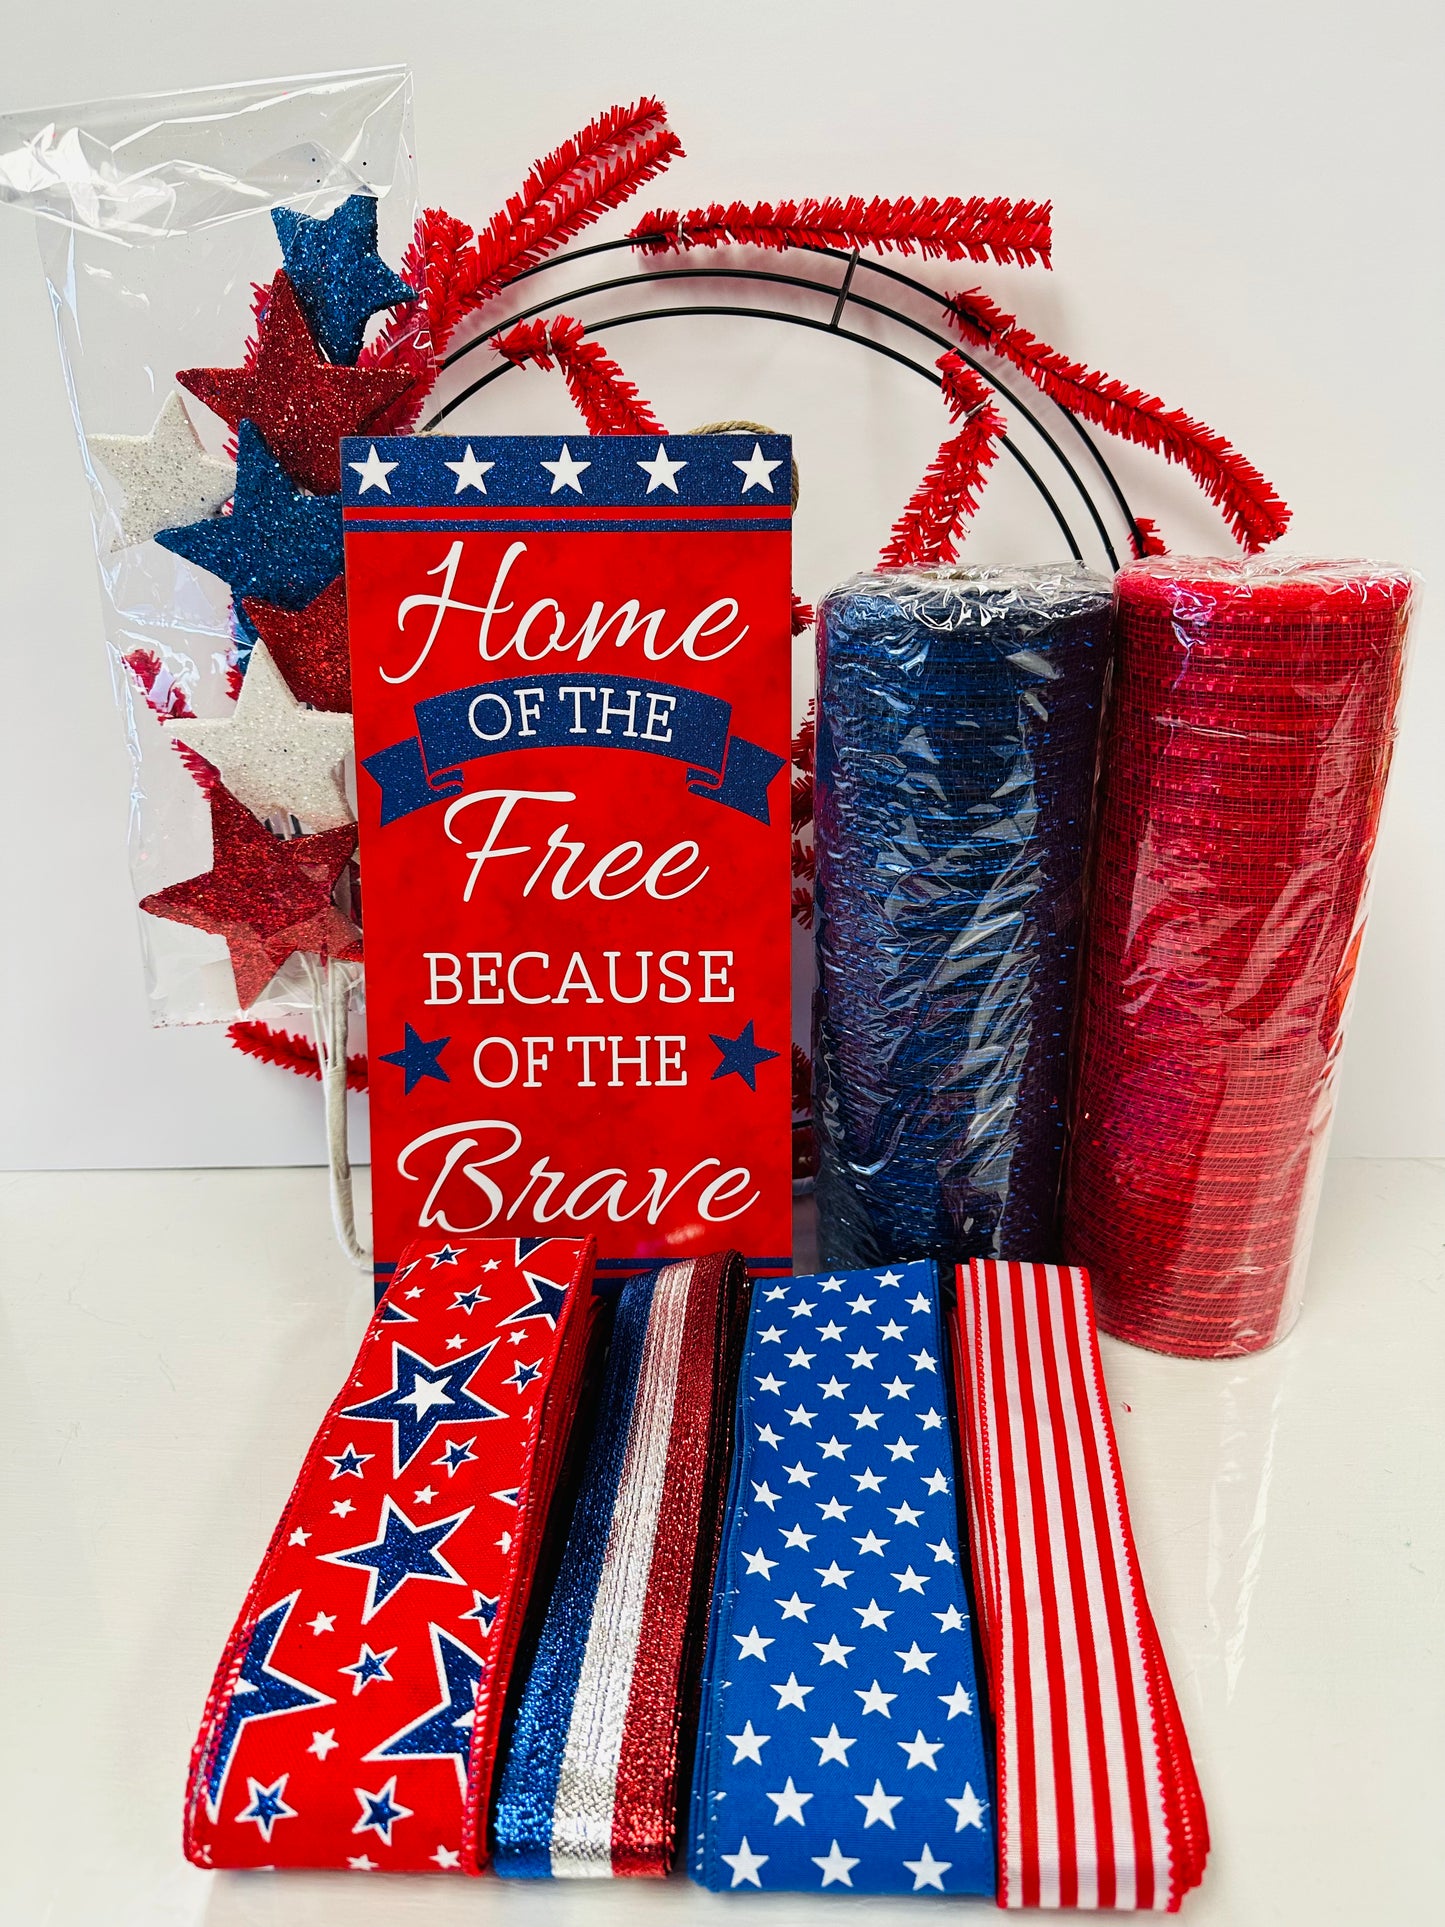 Party Kit - Home of the Free Because of the Brave DIY Wreath